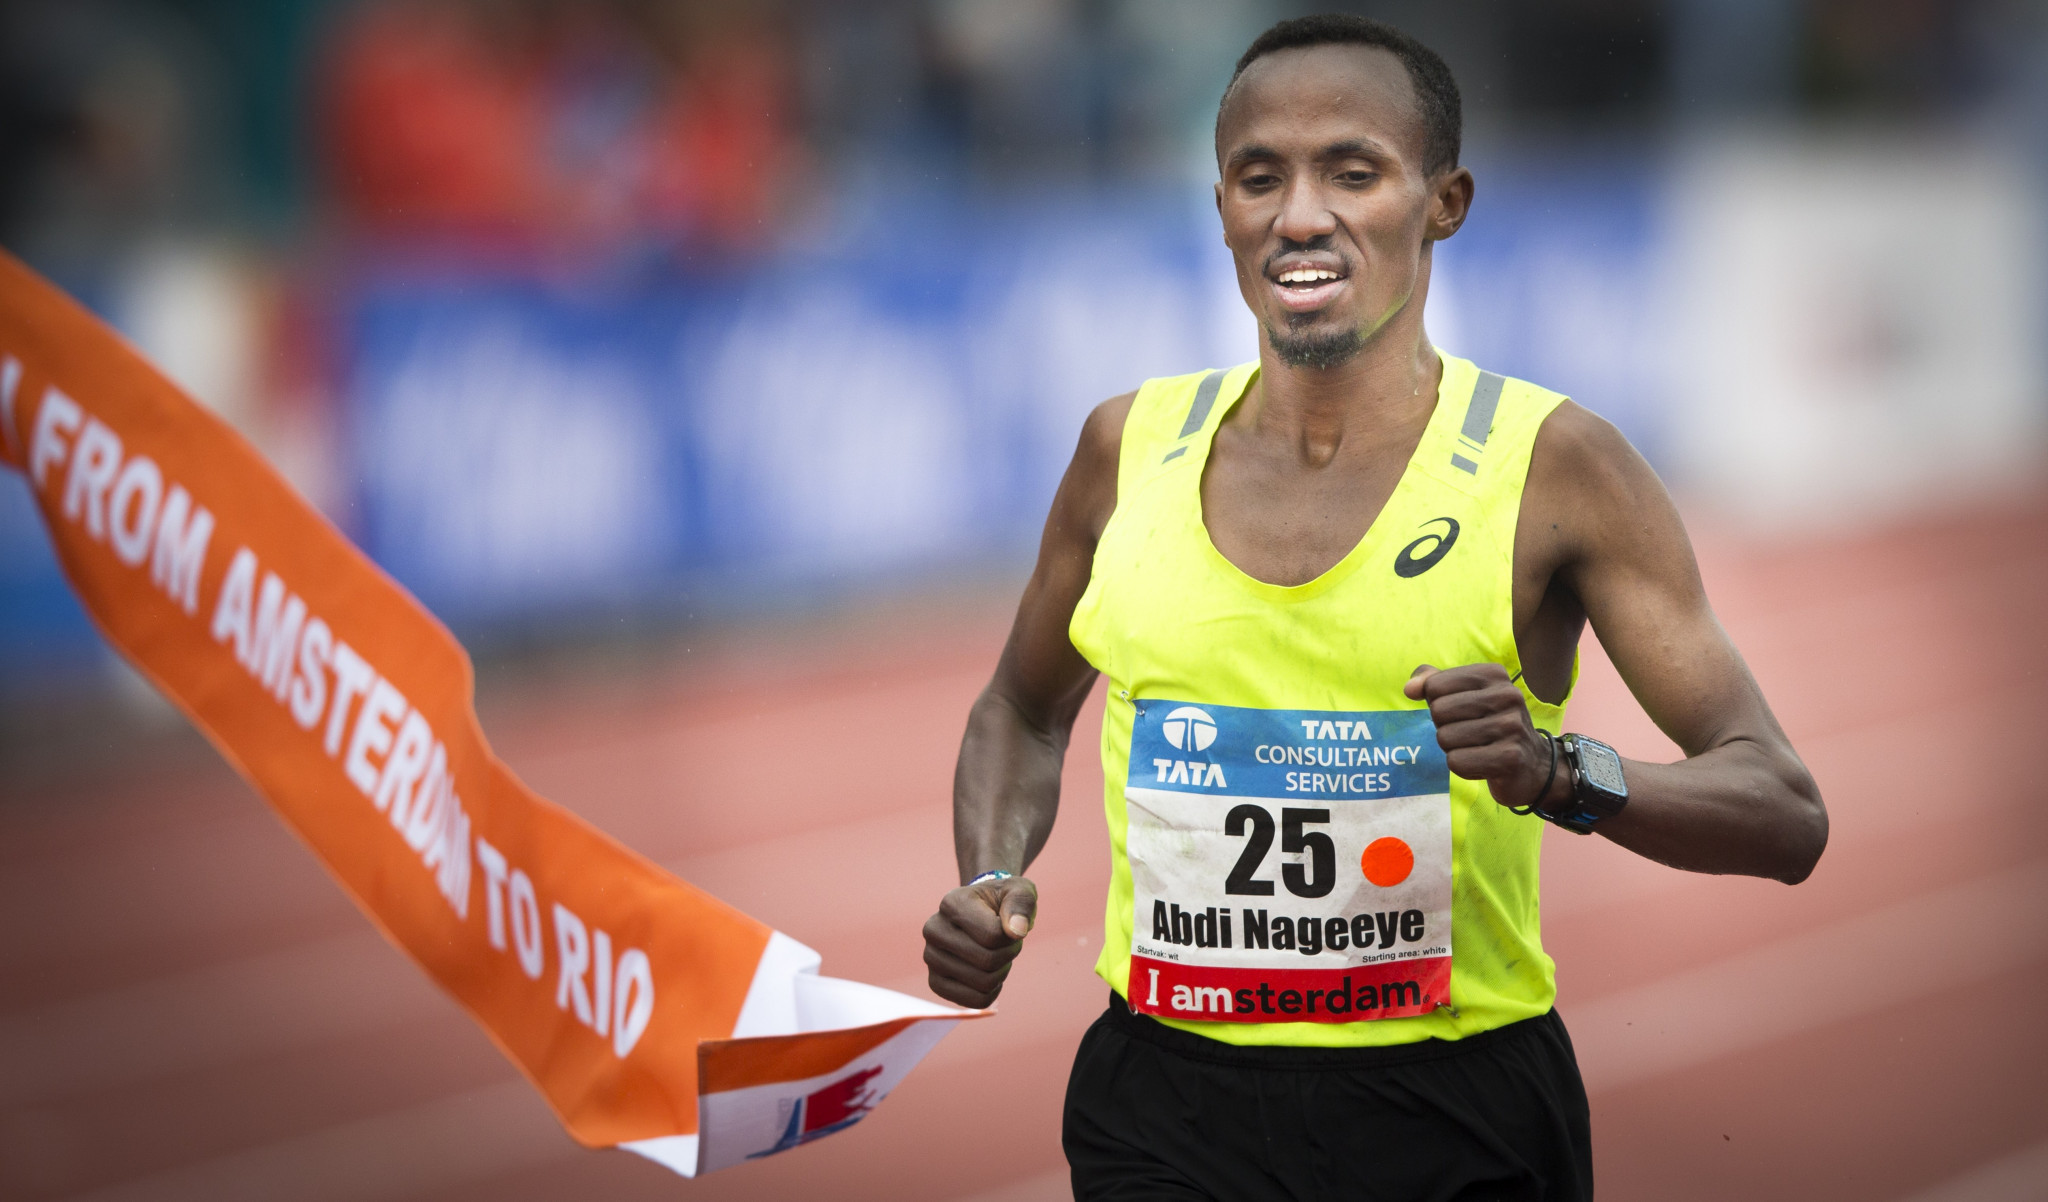 Dutch record holder Abdi Nageeye was due to headline the men's field ©Getty Images